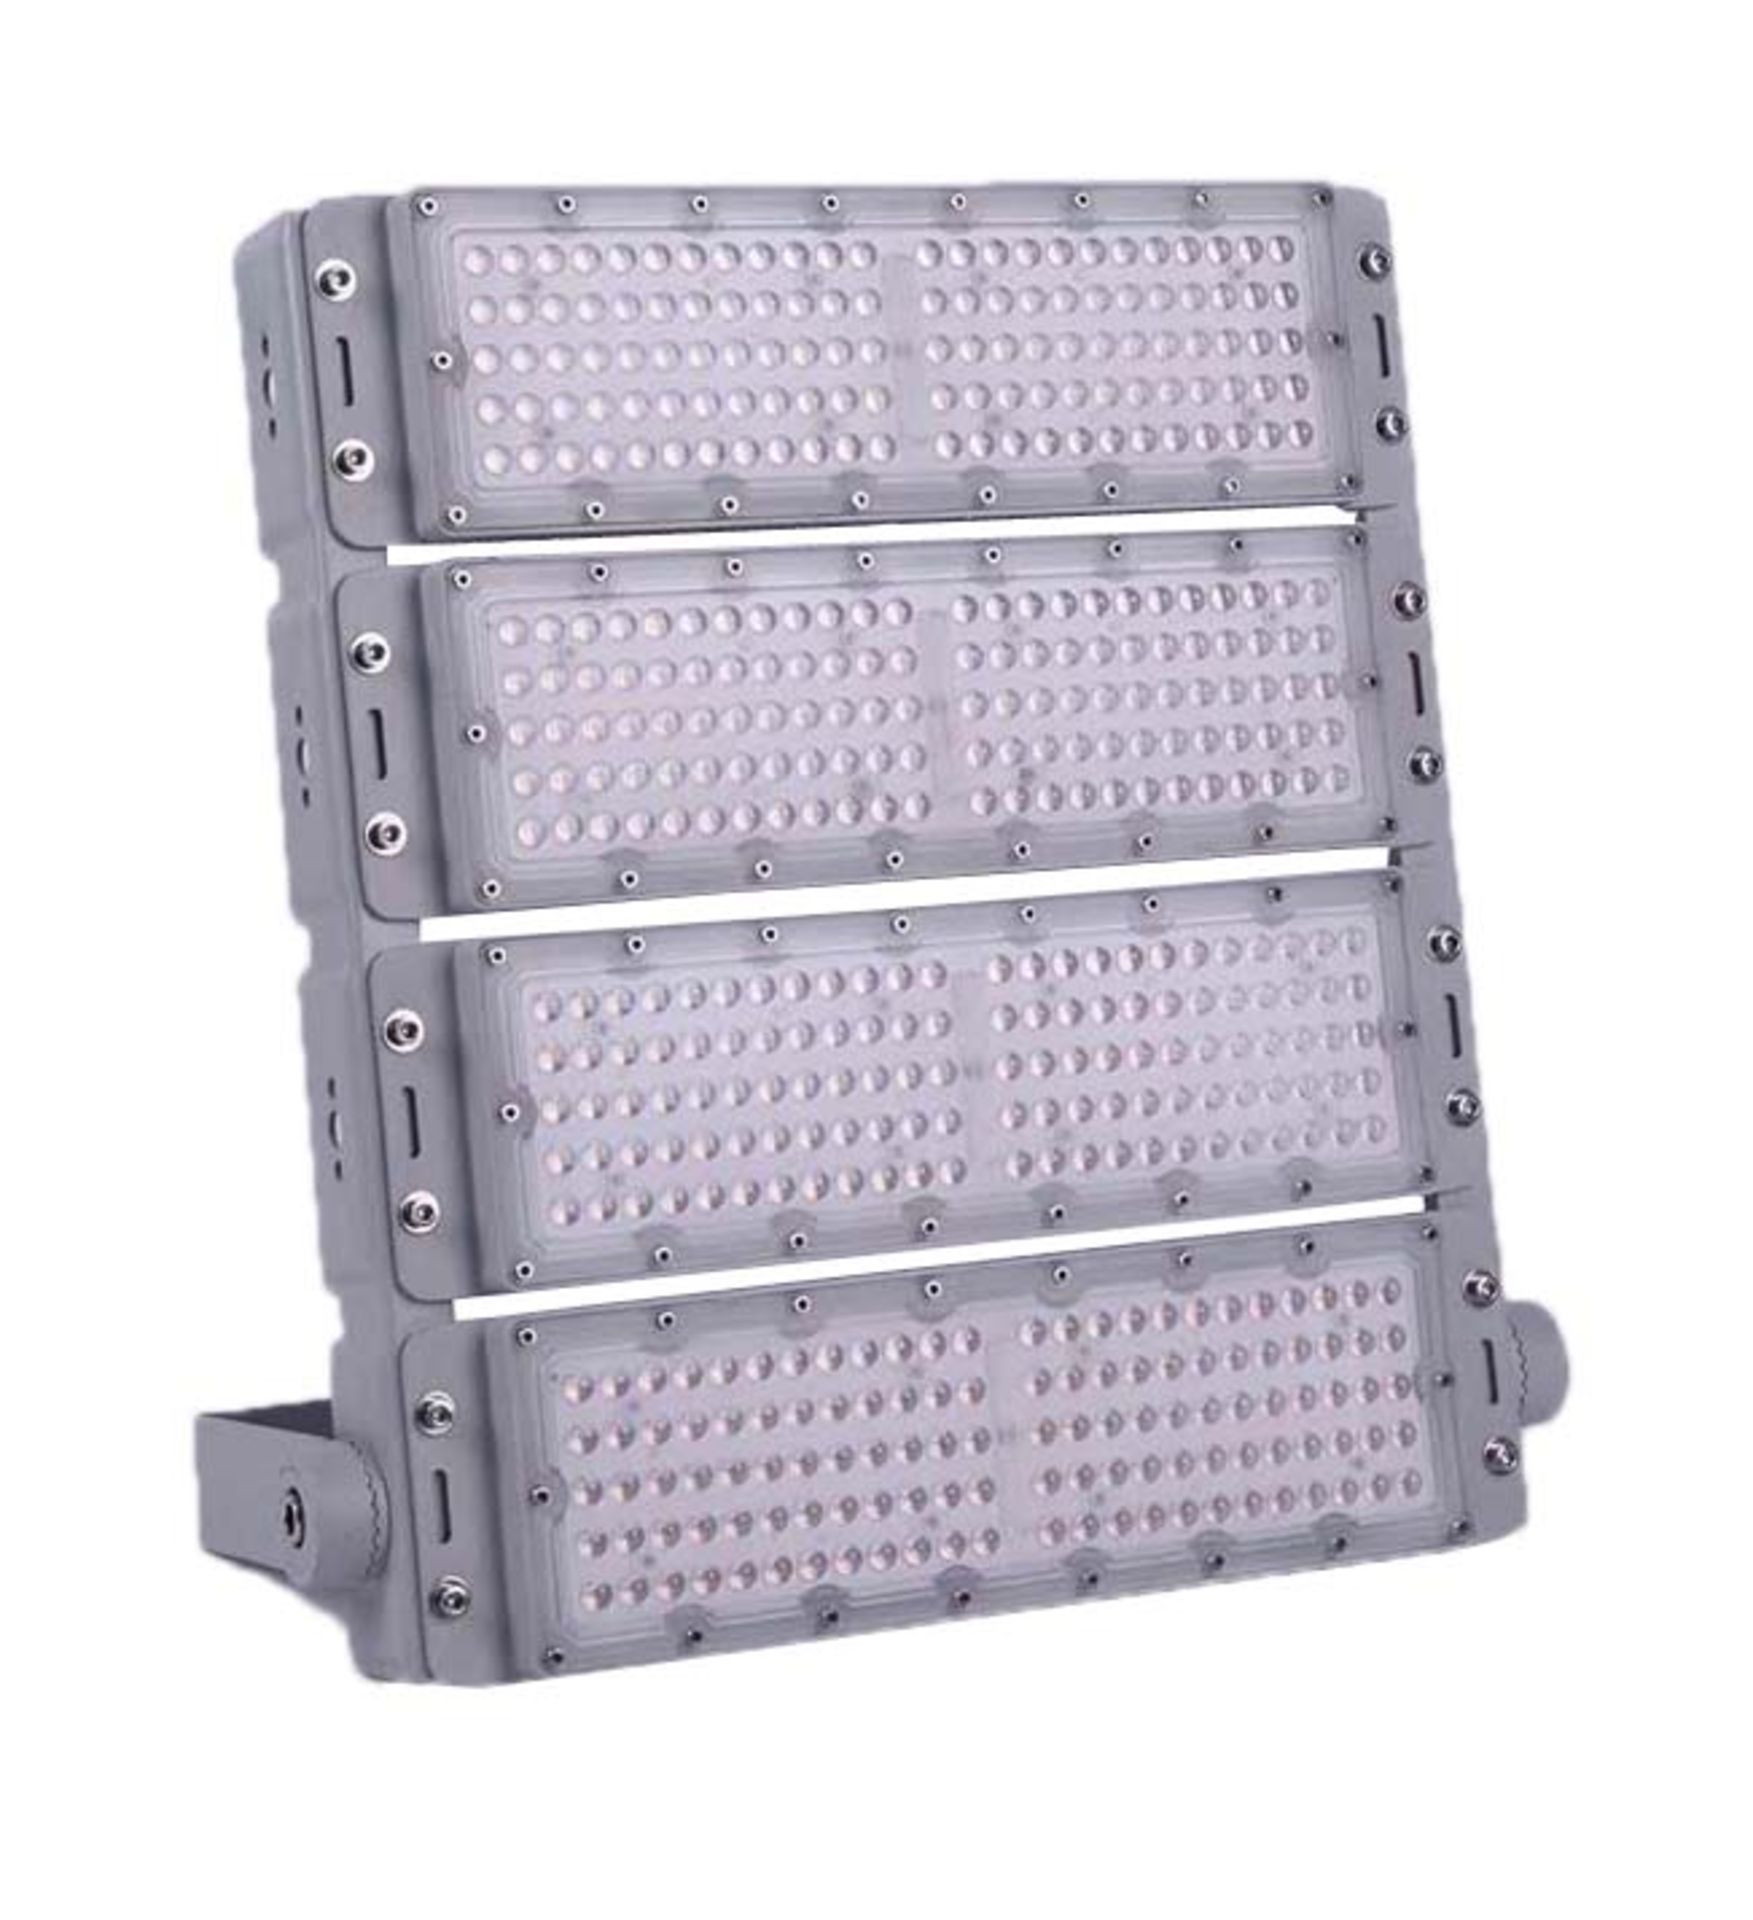 3 x LED400 Watt Flood Light Panel - For Car Parks, Security, Playing fields, Football pitches etc - Image 4 of 8